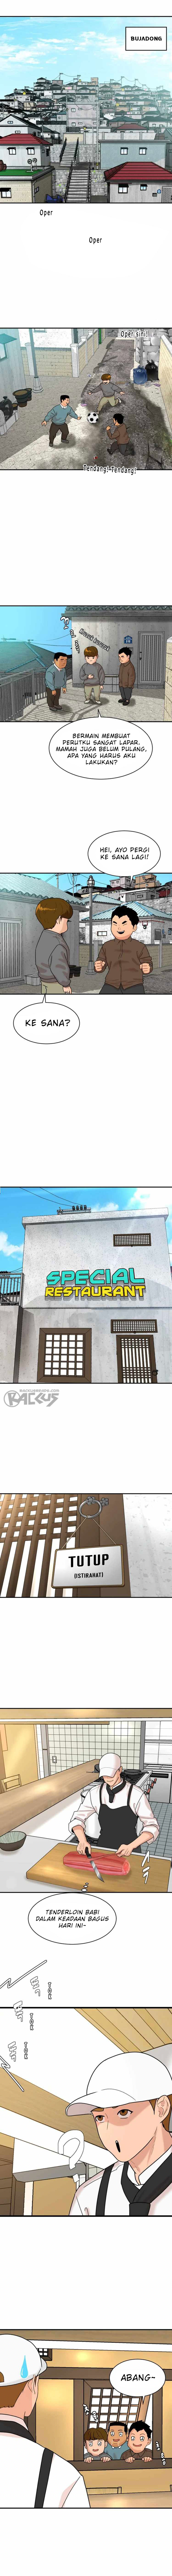 Special Restaurant Chapter 02